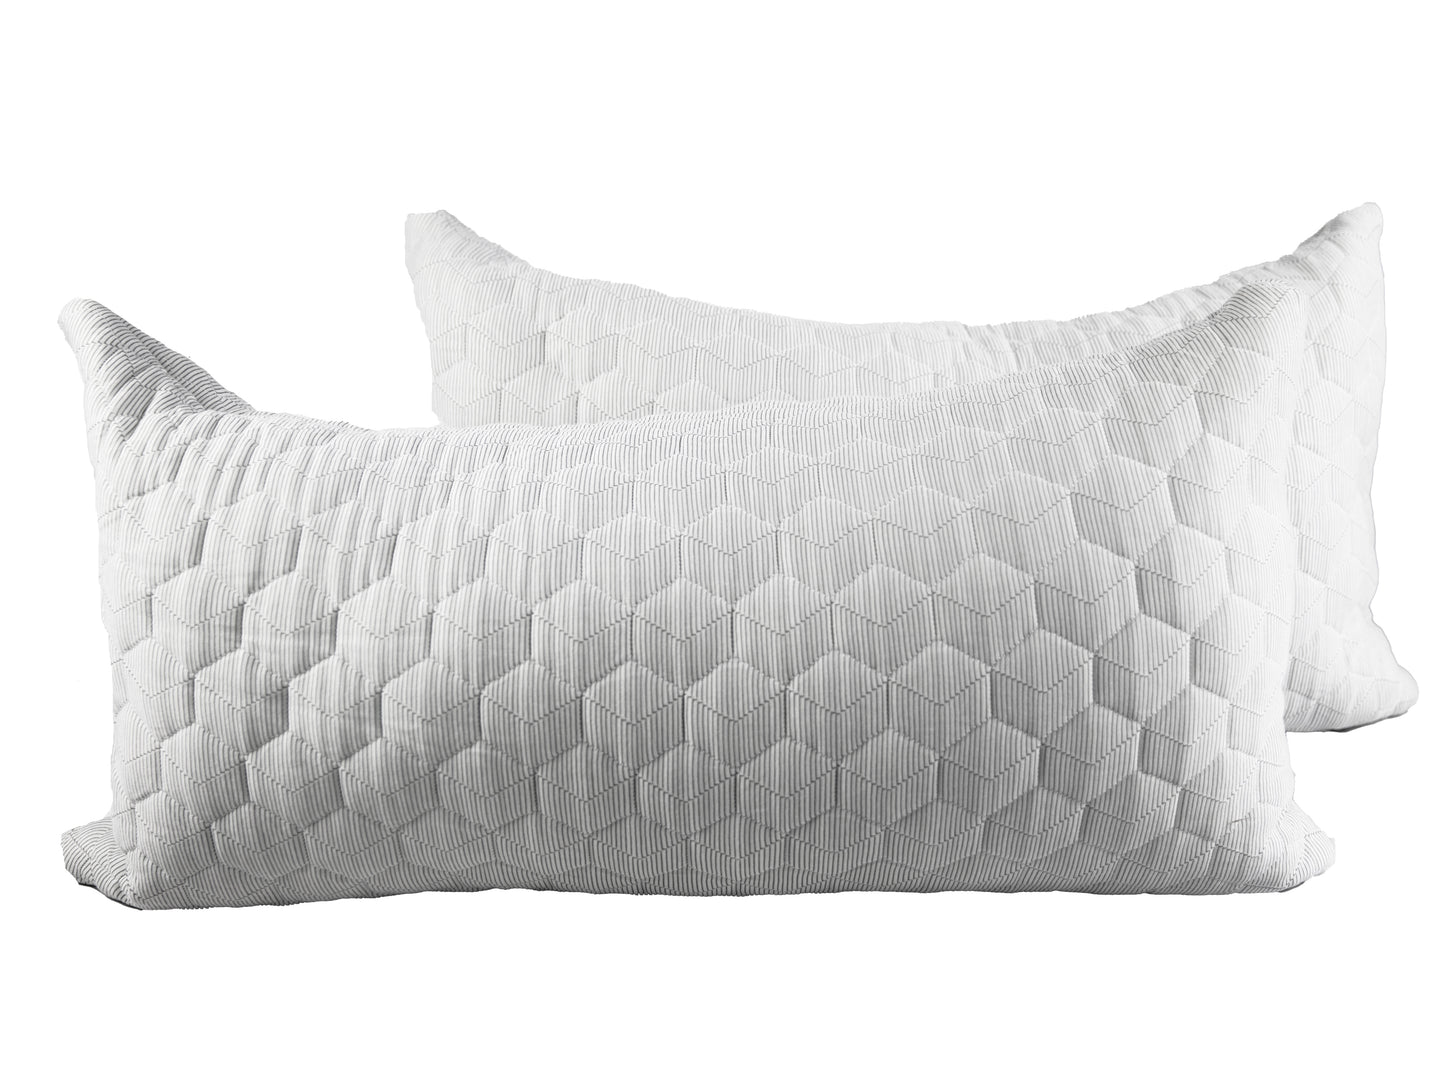 Quilted Standard/Queen or King Bed Sleeping Bed Pillows Lite Gray 2 Pack